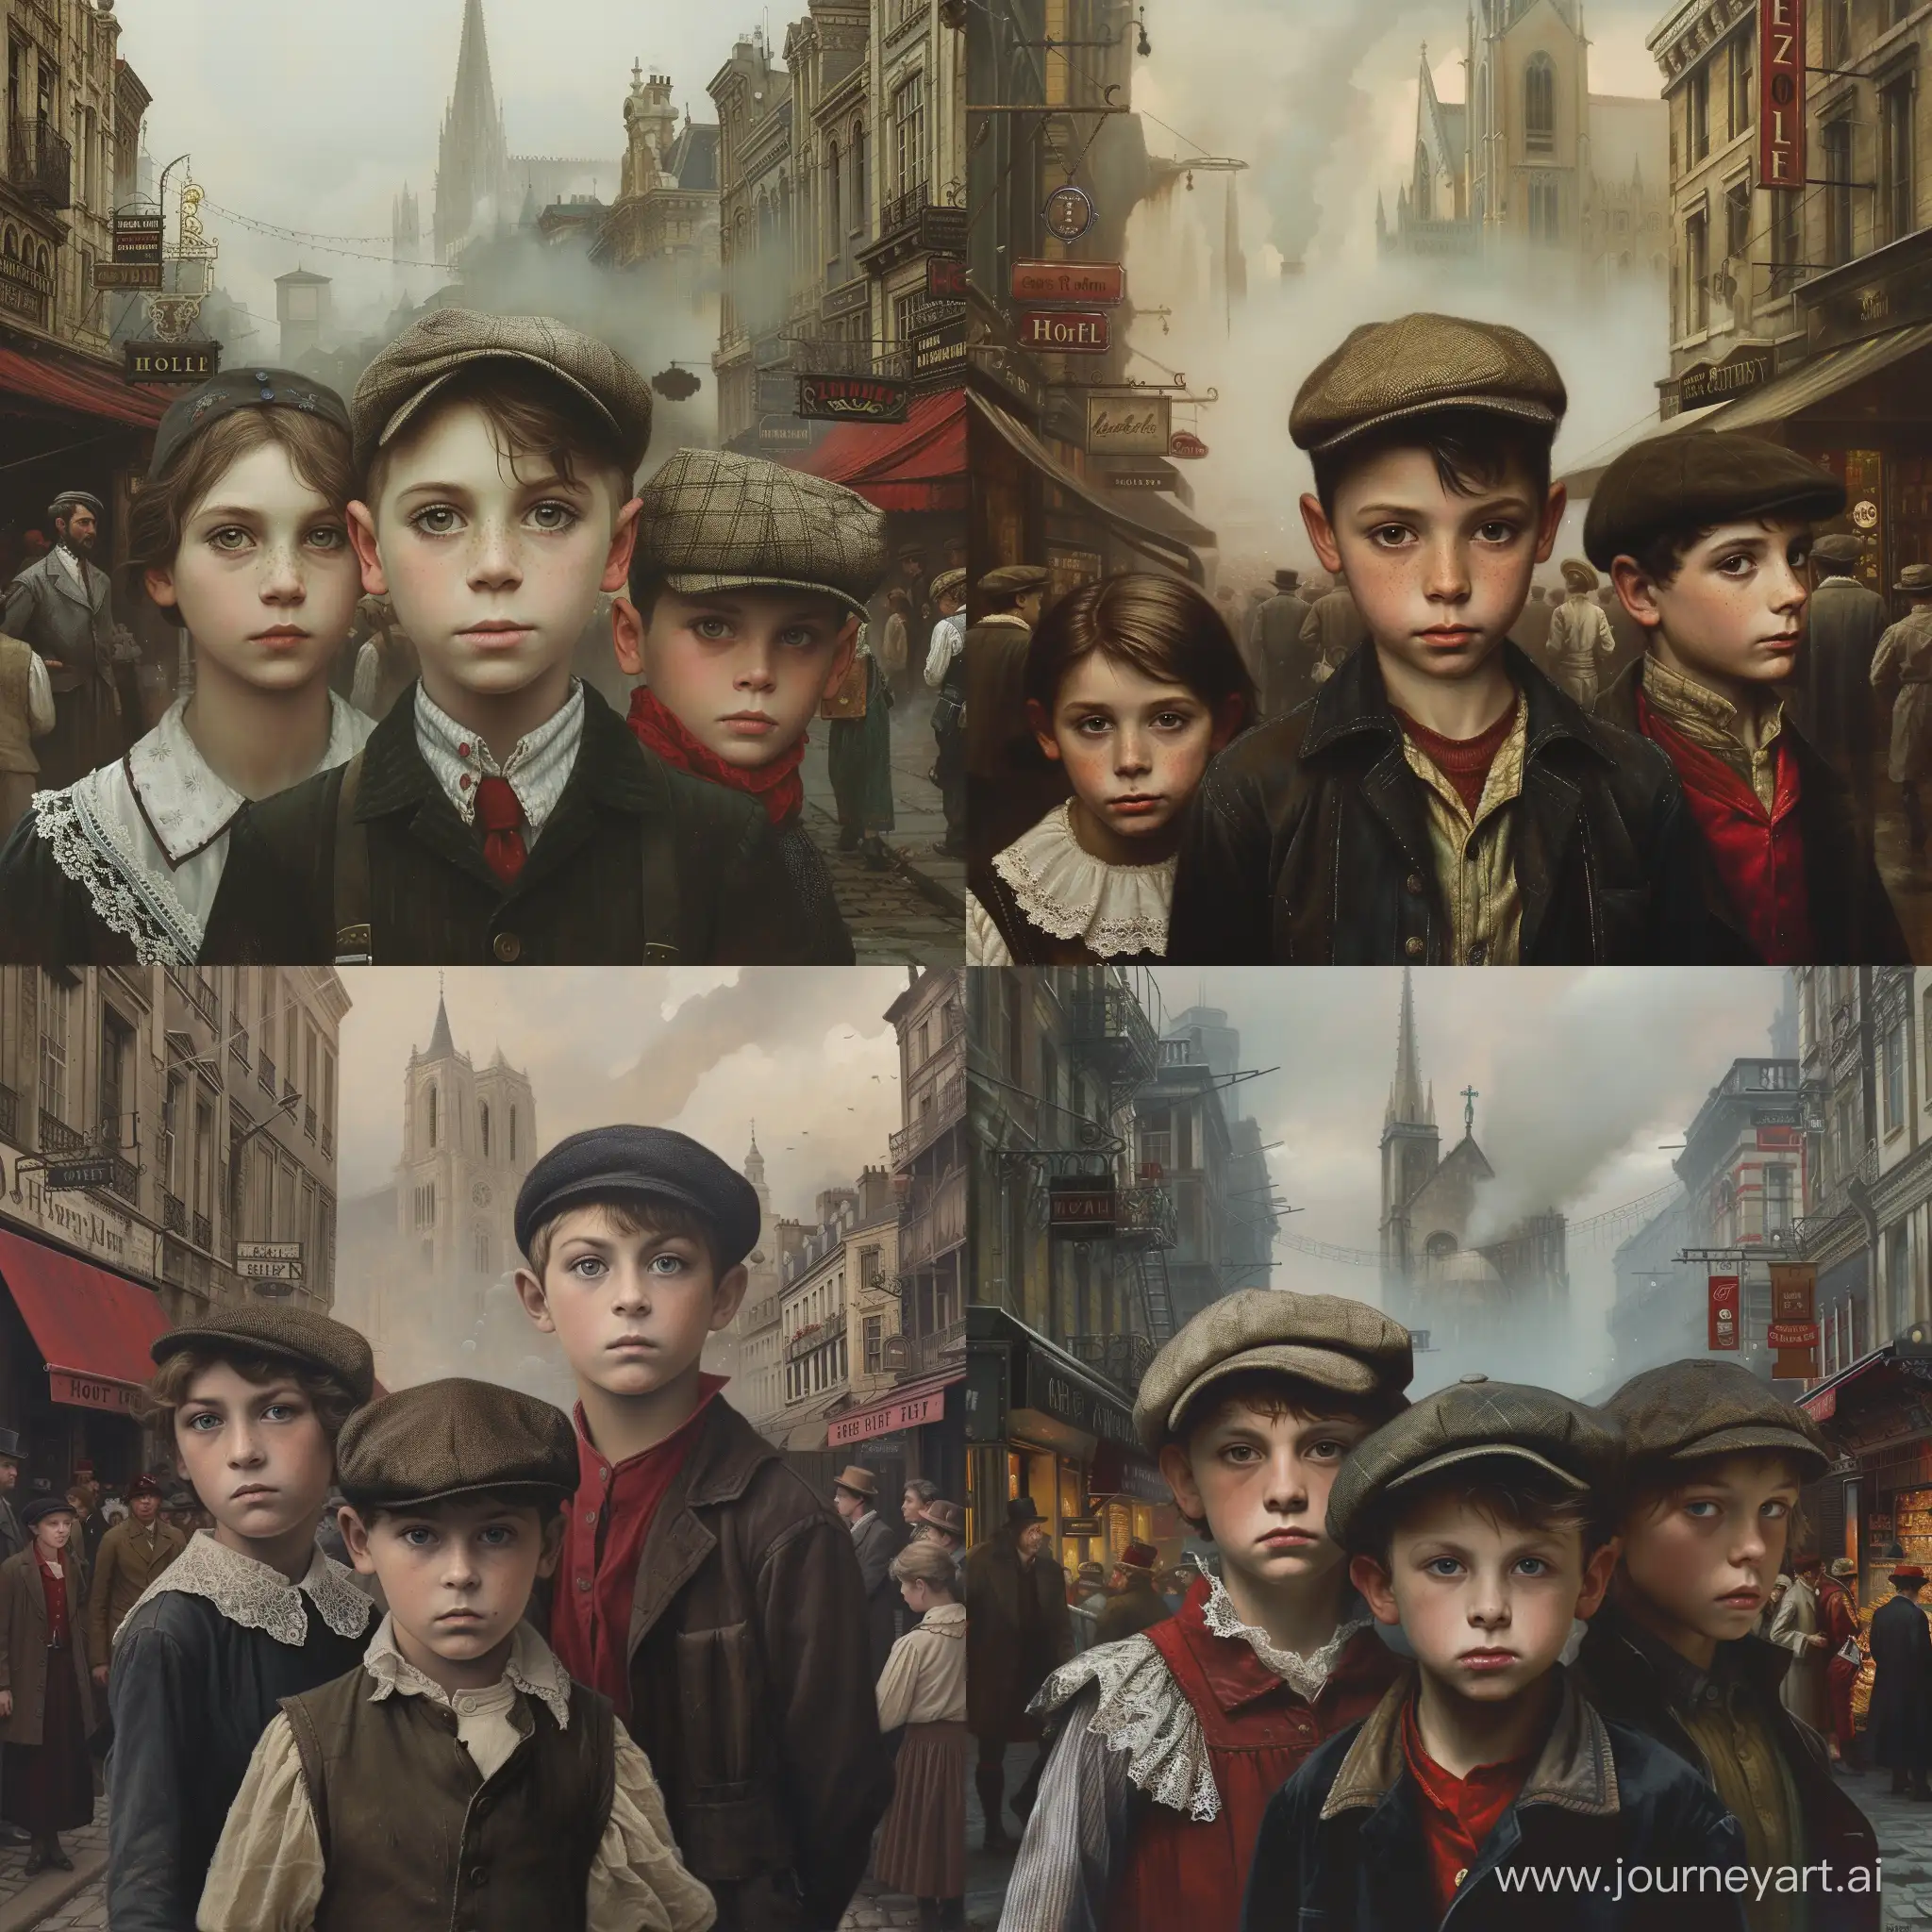 a painting that depicts three young children standing together in the foreground against a bustling city street scene. The children appear to be from a historical period, possibly the 19th or early 20th century, judging by their clothing and the architectural style of the buildings.

The child in the middle and the one on the right are both boys, wearing caps and jackets that suggest working-class or lower-middle-class status. The boy in the center is looking directly at the viewer, while the boy on the right gazes slightly to the side. They both have serious, somber expressions. The boy on the right also wears a red scarf around his neck, adding a touch of color to his otherwise dark attire.

The child on the left is a girl, with a lace collar and what seems to be a more subdued expression than the boys. Her hair is styled in a way that complements the era depicted.

The background of the painting is rich in detail, with many characters going about their daily lives. You can see shop fronts, including one with a visible sign that says "Hotel," people walking, conversing, and carrying goods. The street fades into a misty atmosphere in the distance, where a cathedral or large church looms, indicating that this may be a scene set in a European city.

The lighting and color palette are moody and reminiscent of the atmosphere of the industrial revolution—smog and the dim lighting that suggests either early morning or late evening. The focus on the children, with their direct and confrontational gaze, evokes a narrative quality, encouraging viewers to contemplate their story within this urban environment.--stylize 750 --v 6